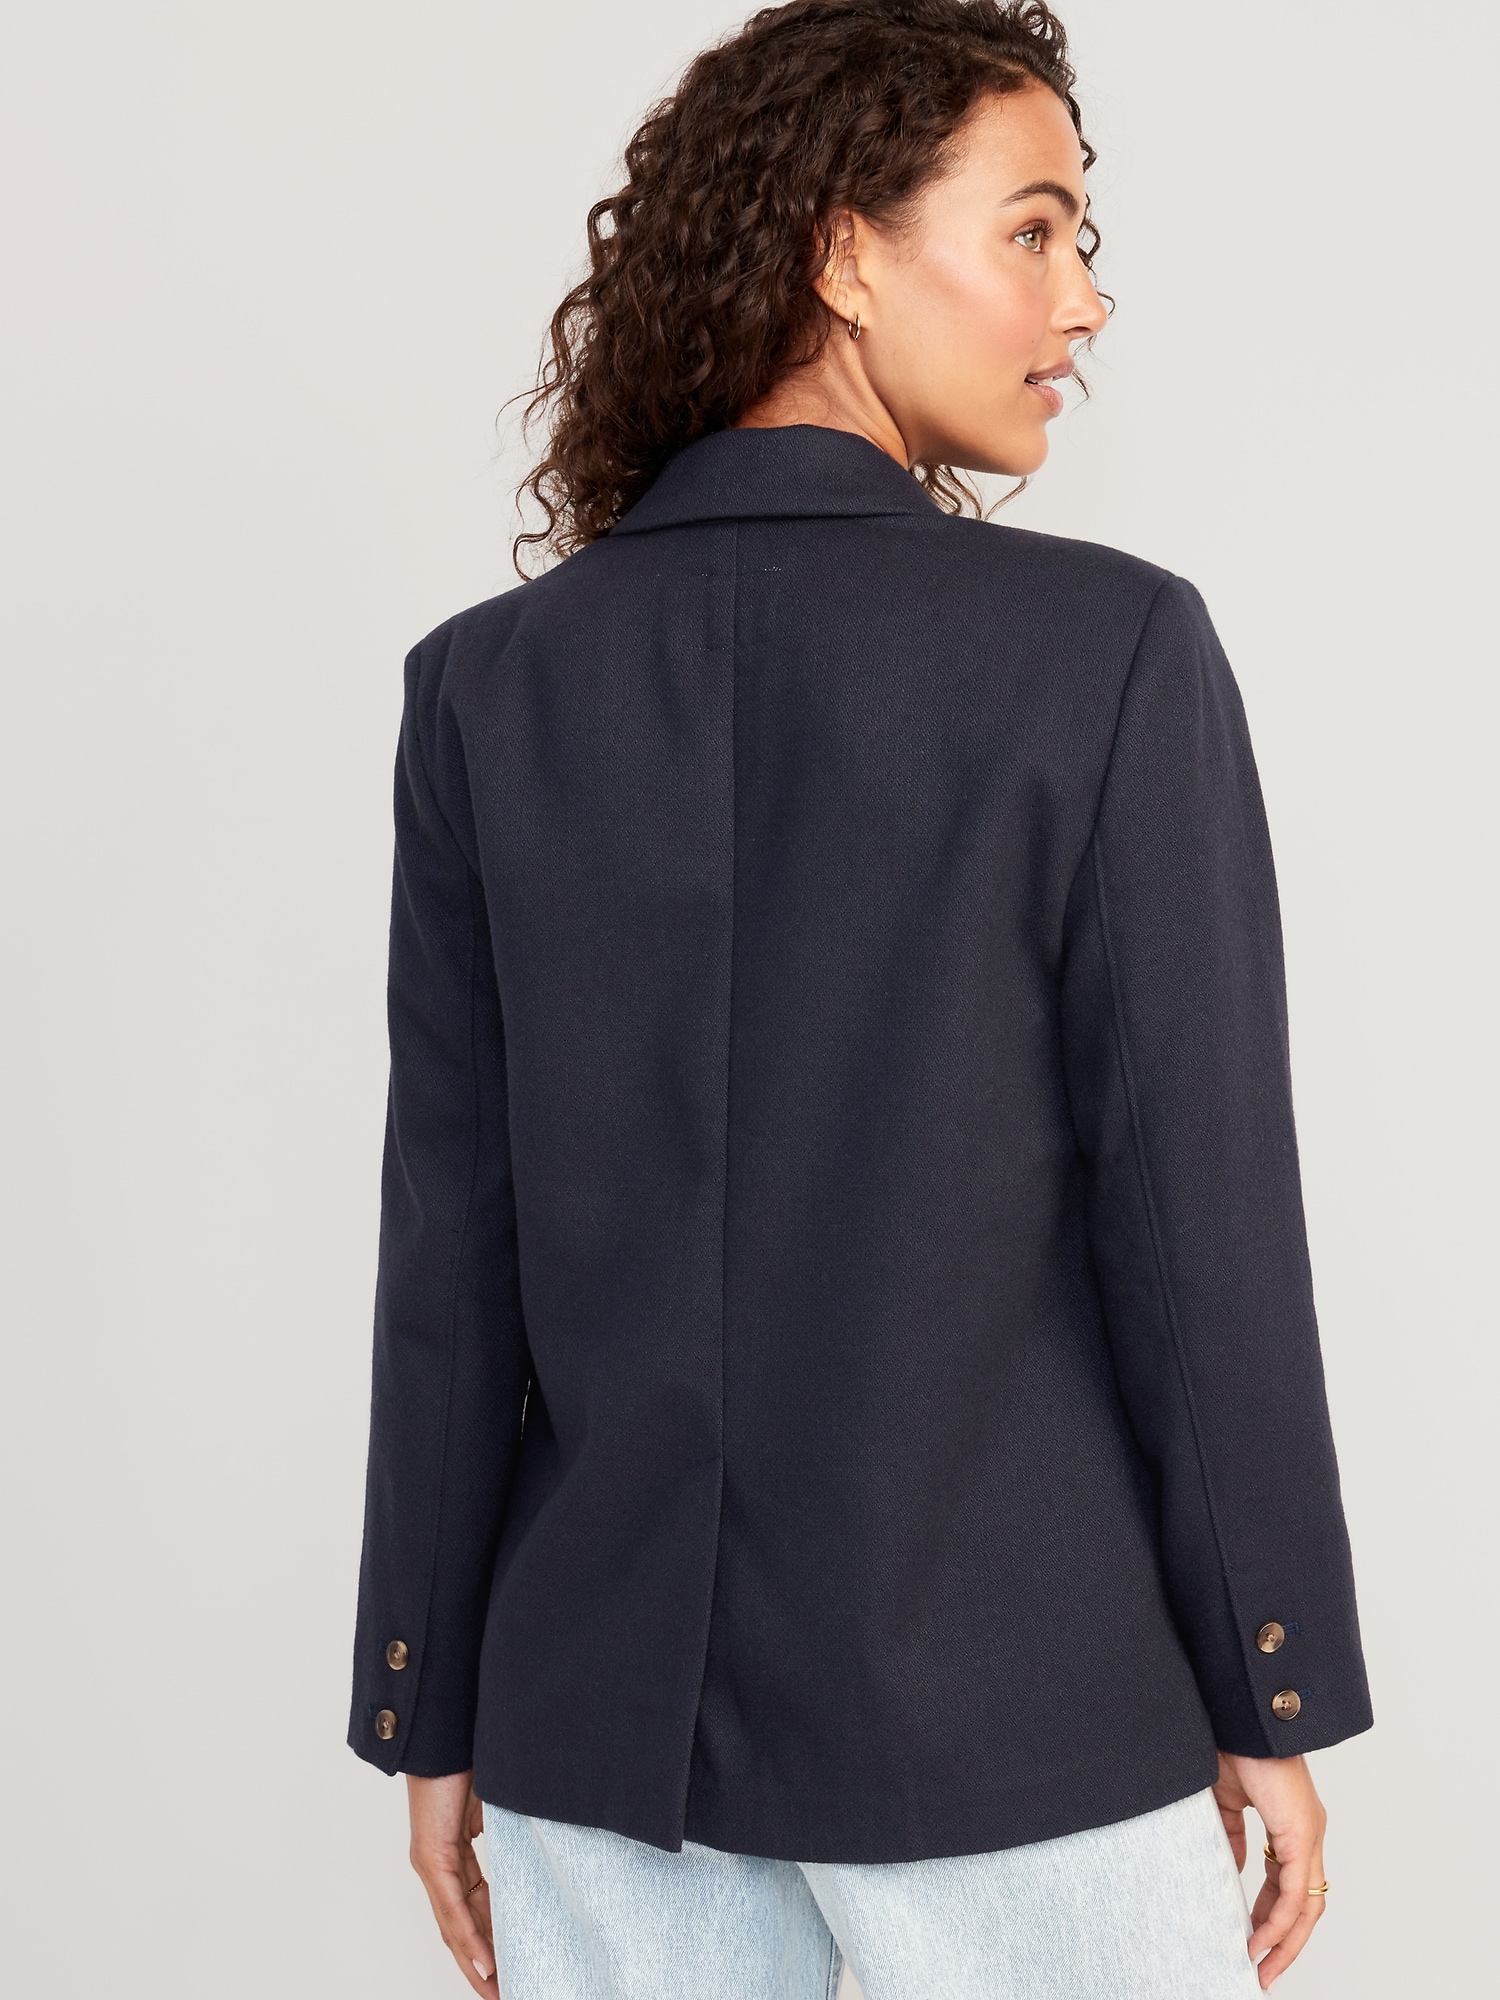 Double Breasted Textured Blazer For Women Old Navy